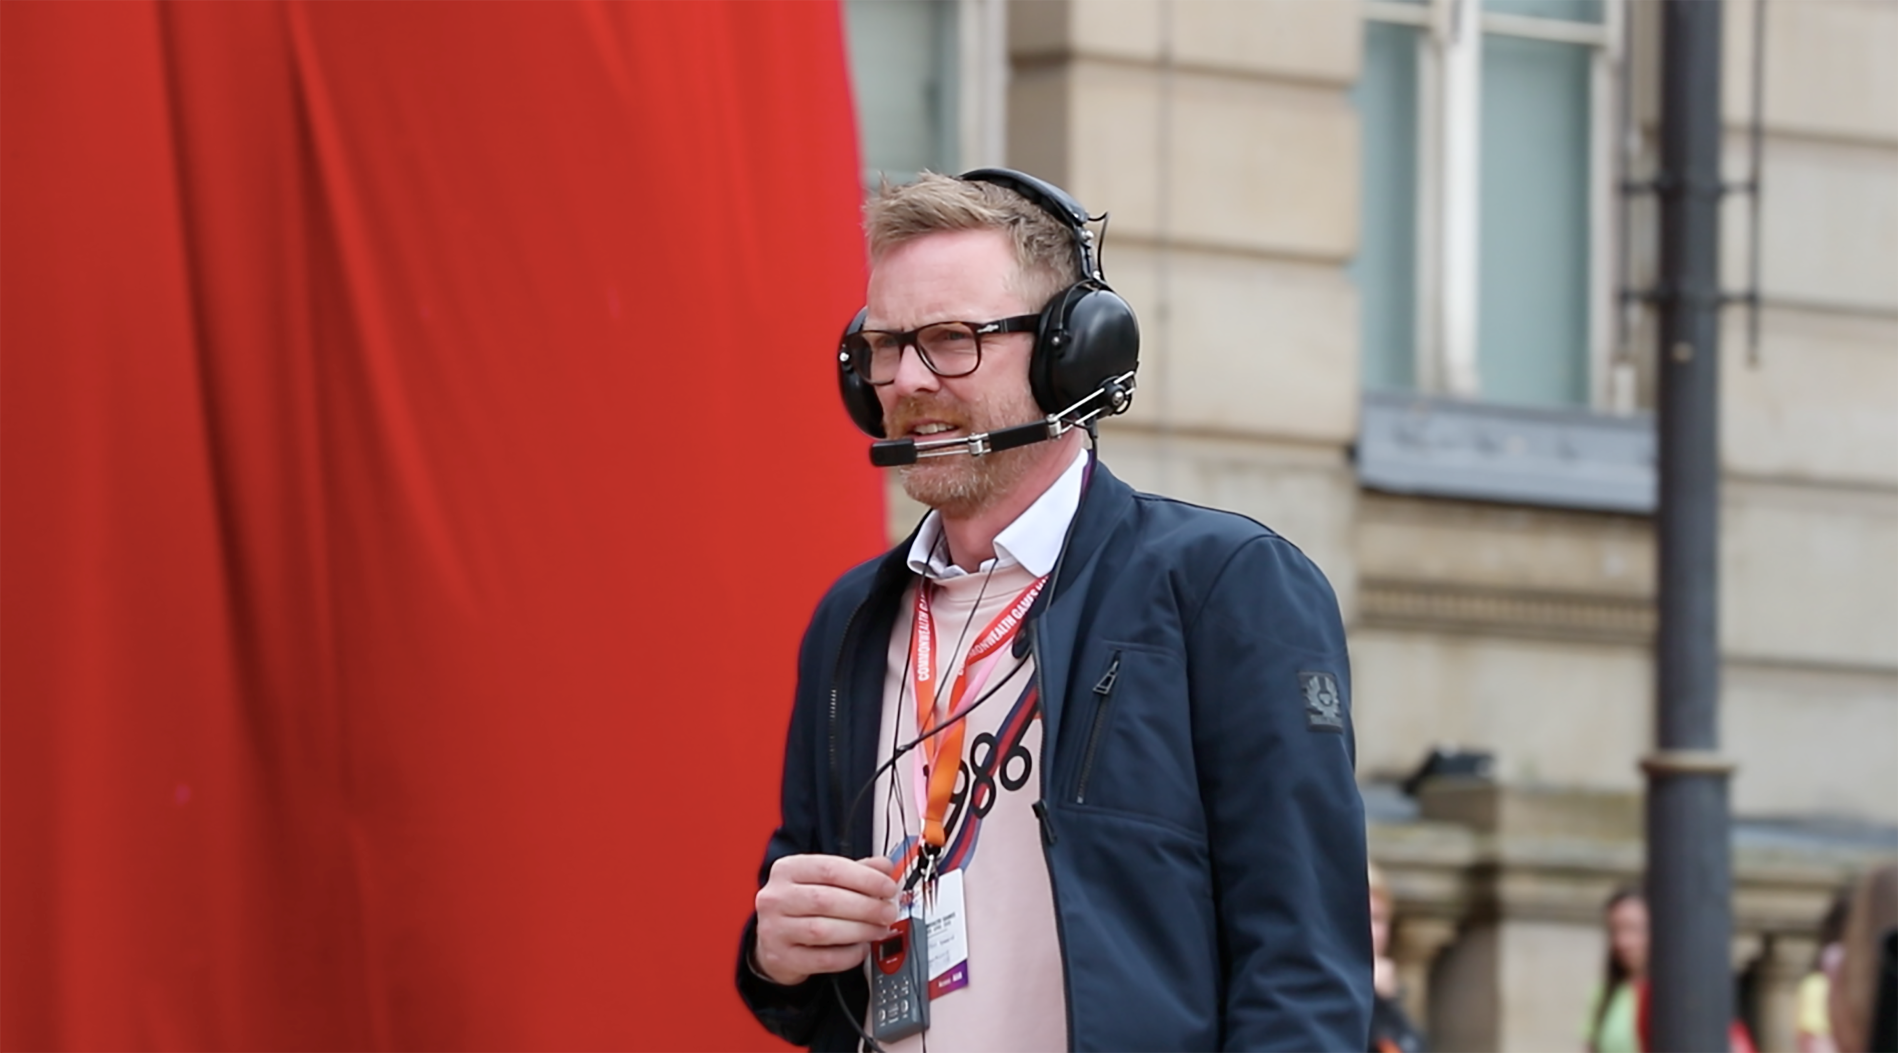 London 2012 head of ceremonies appointed chief creative officer at Birmingham 2022